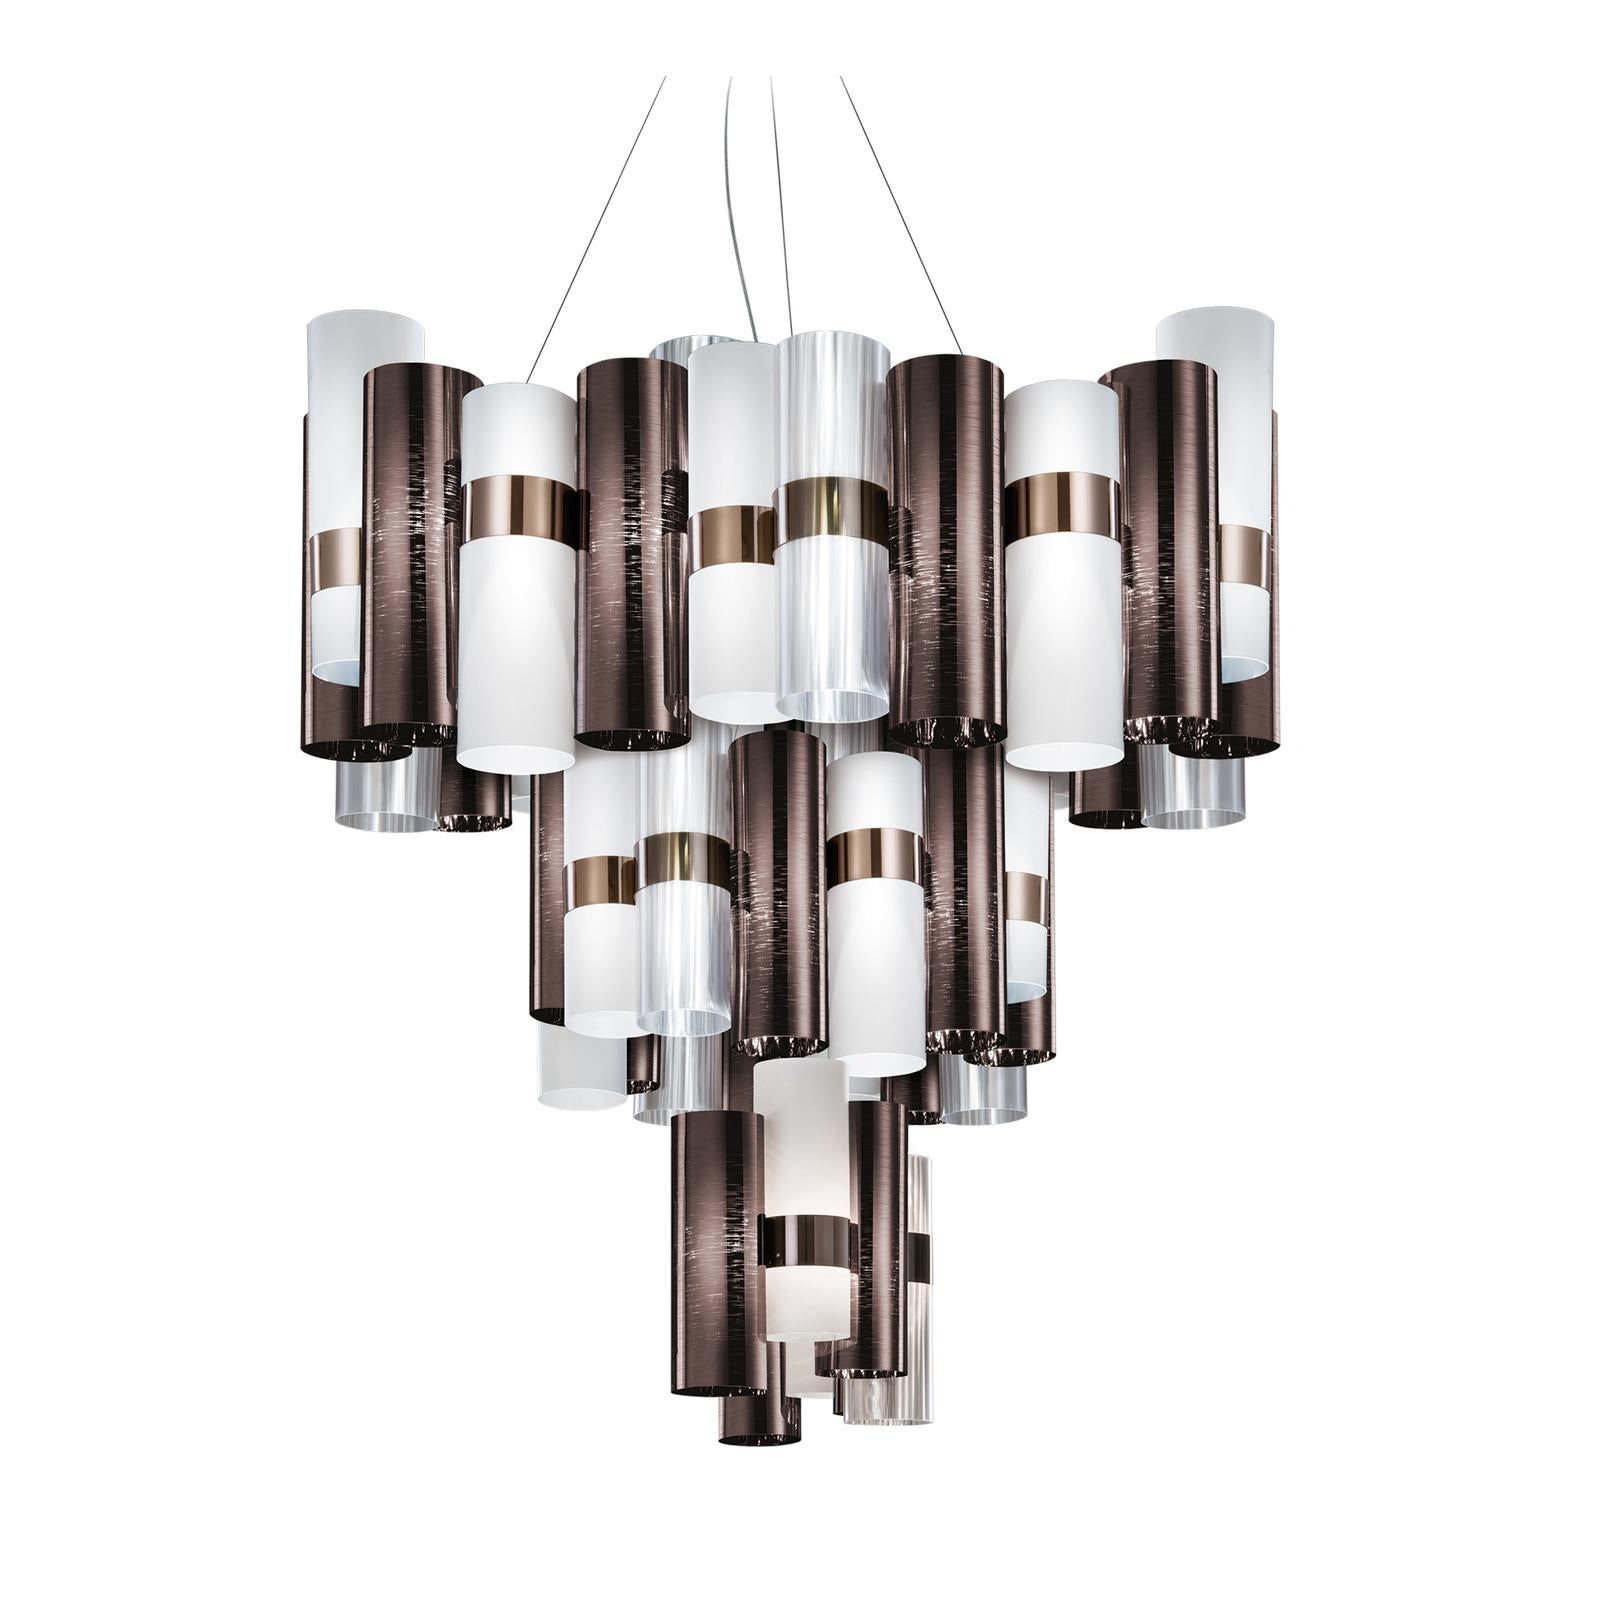 This stunning ceiling lamp is part of the La Lollo collection by Lorenza Bozzoli, inspired by the elegance and glamour of the 1950s movies. Entirely made of resistant and completely recyclable engineered plastic, its silhouette comprises a series of